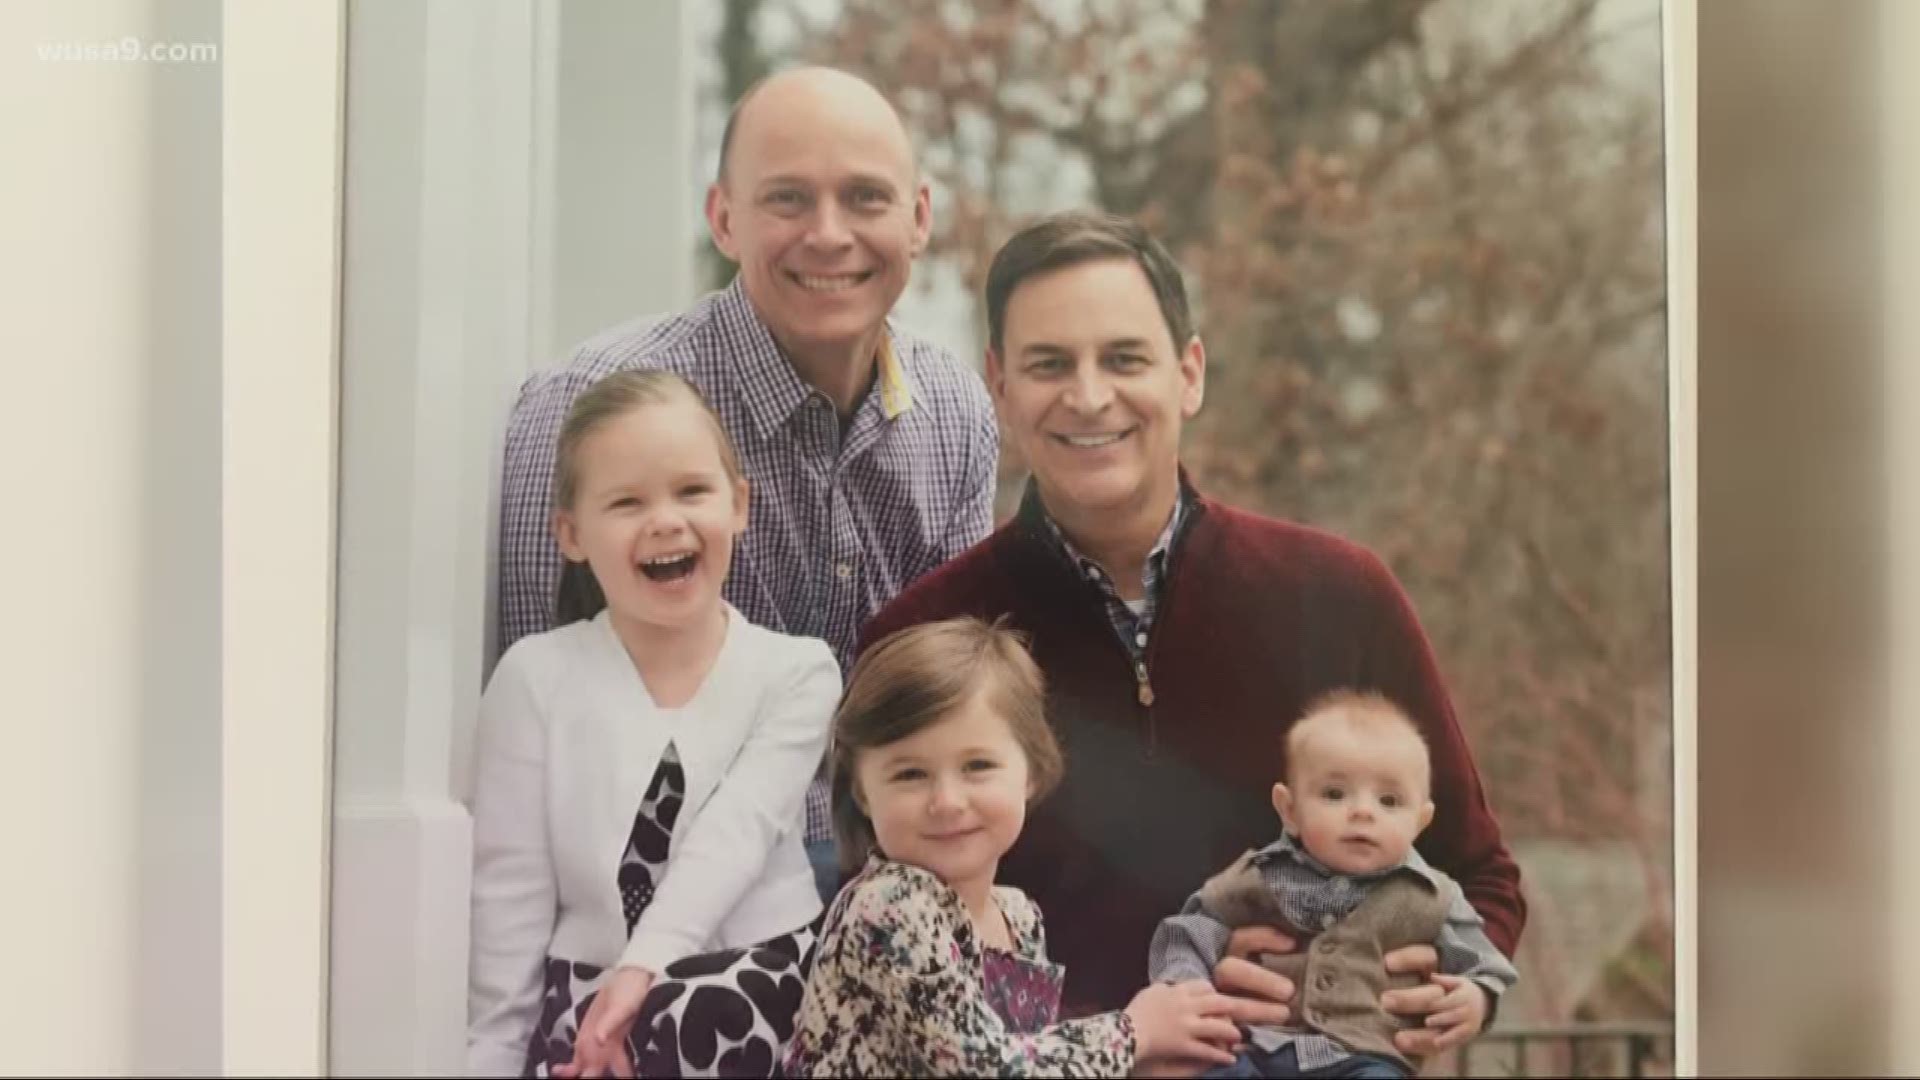 A same sex-couple in Virginia who had to fight for the right to raise their child, helped push through new legislation that will streamline the process and help other families.